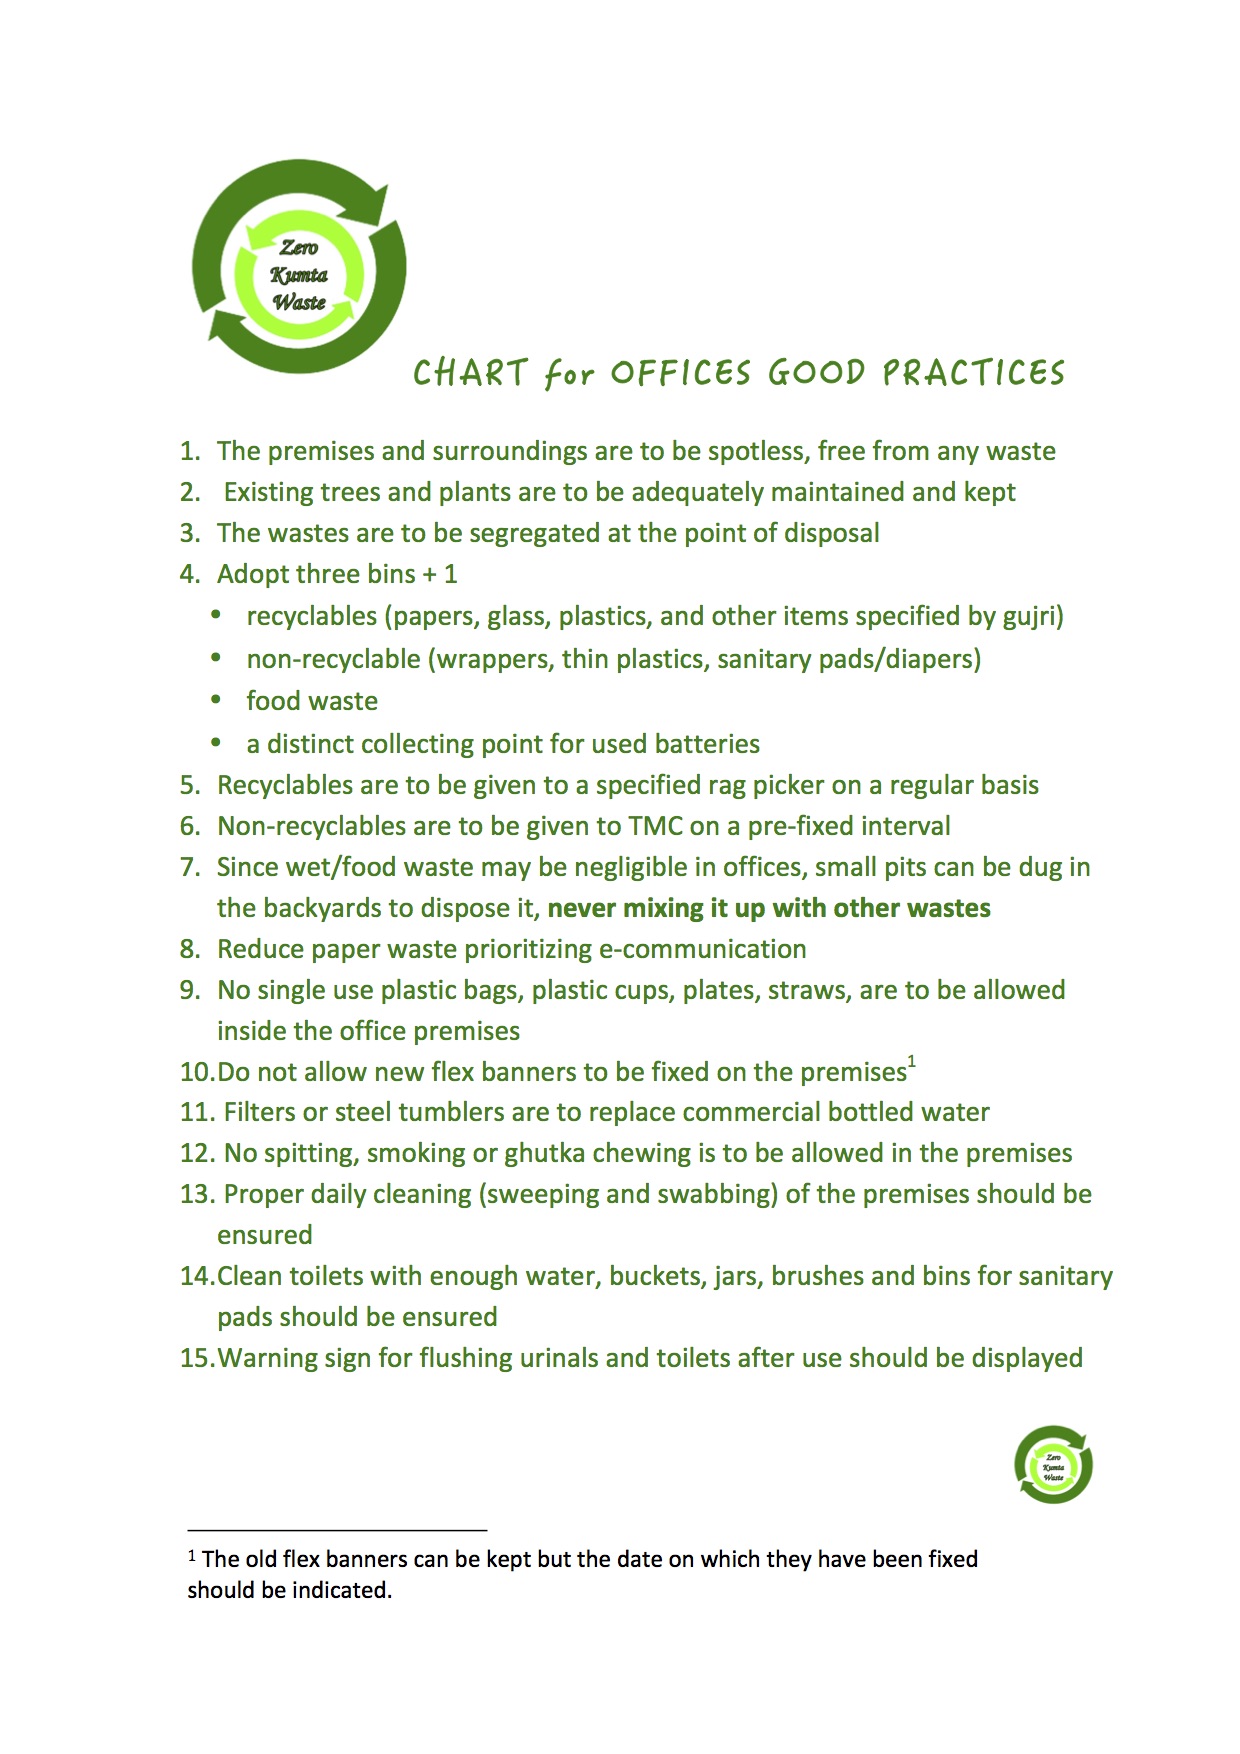 CHART GOOD PRACTICES OFFICES